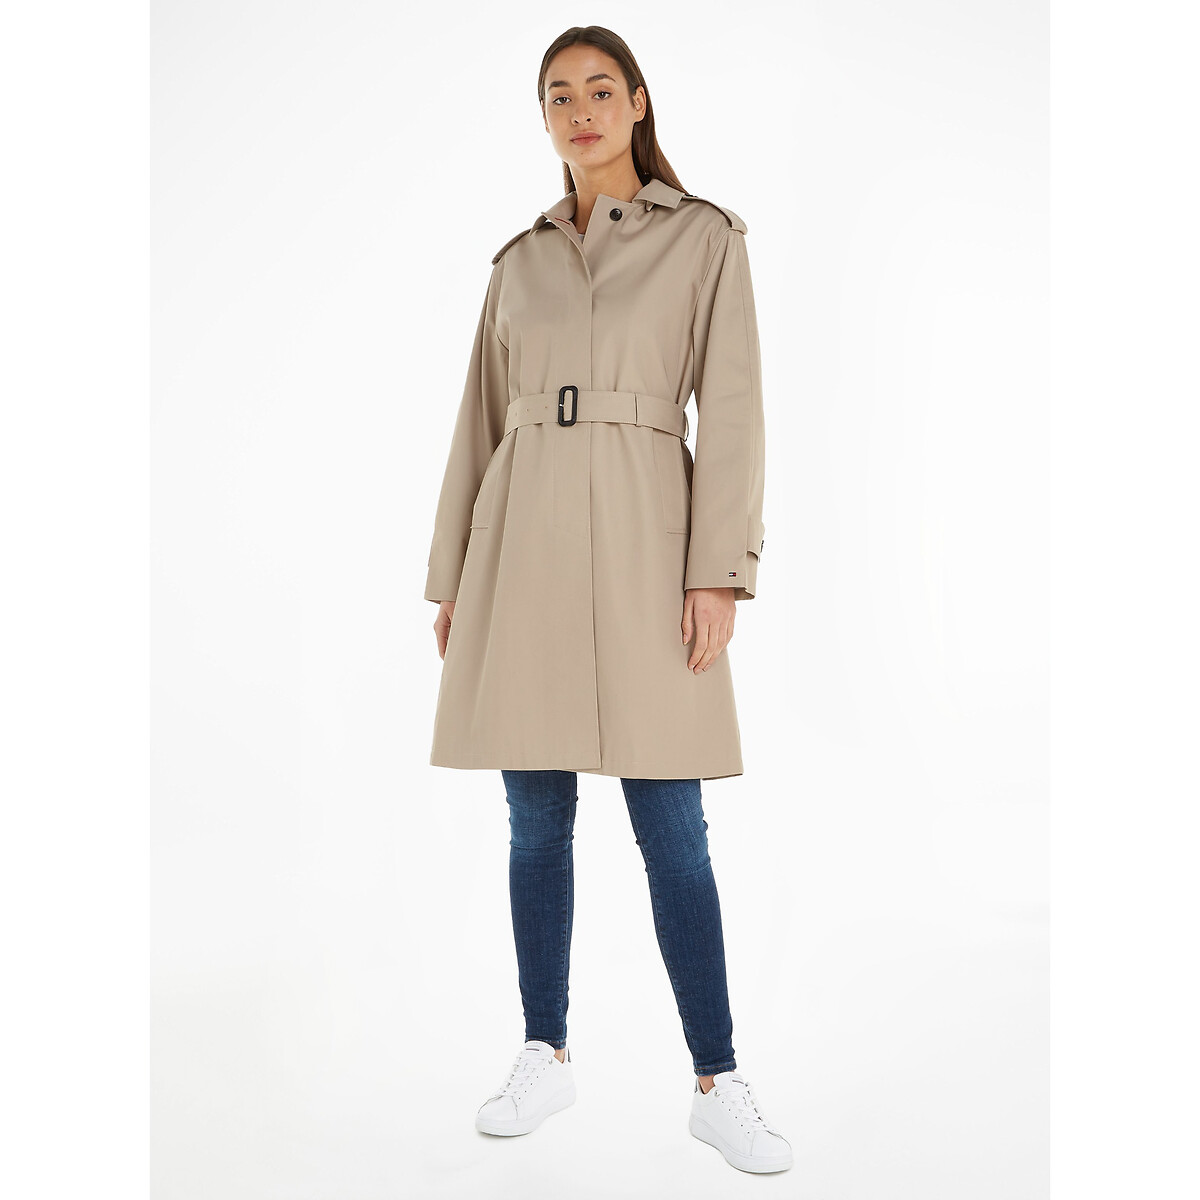 Cotton Hooded Belted Trench Coat, Mid-Length